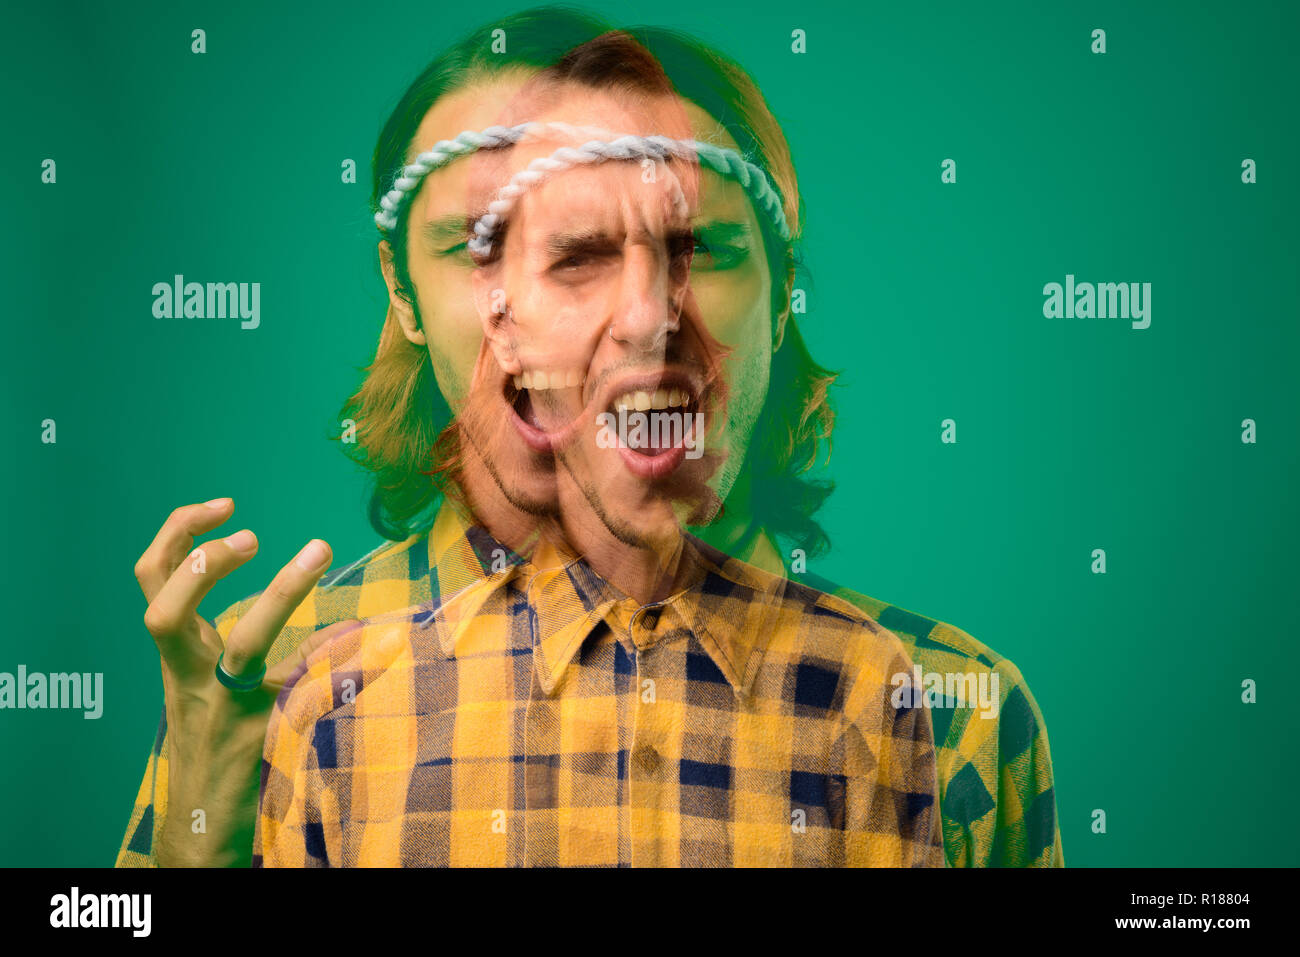 Studio shot of rebellious young man against green background Stock Photo